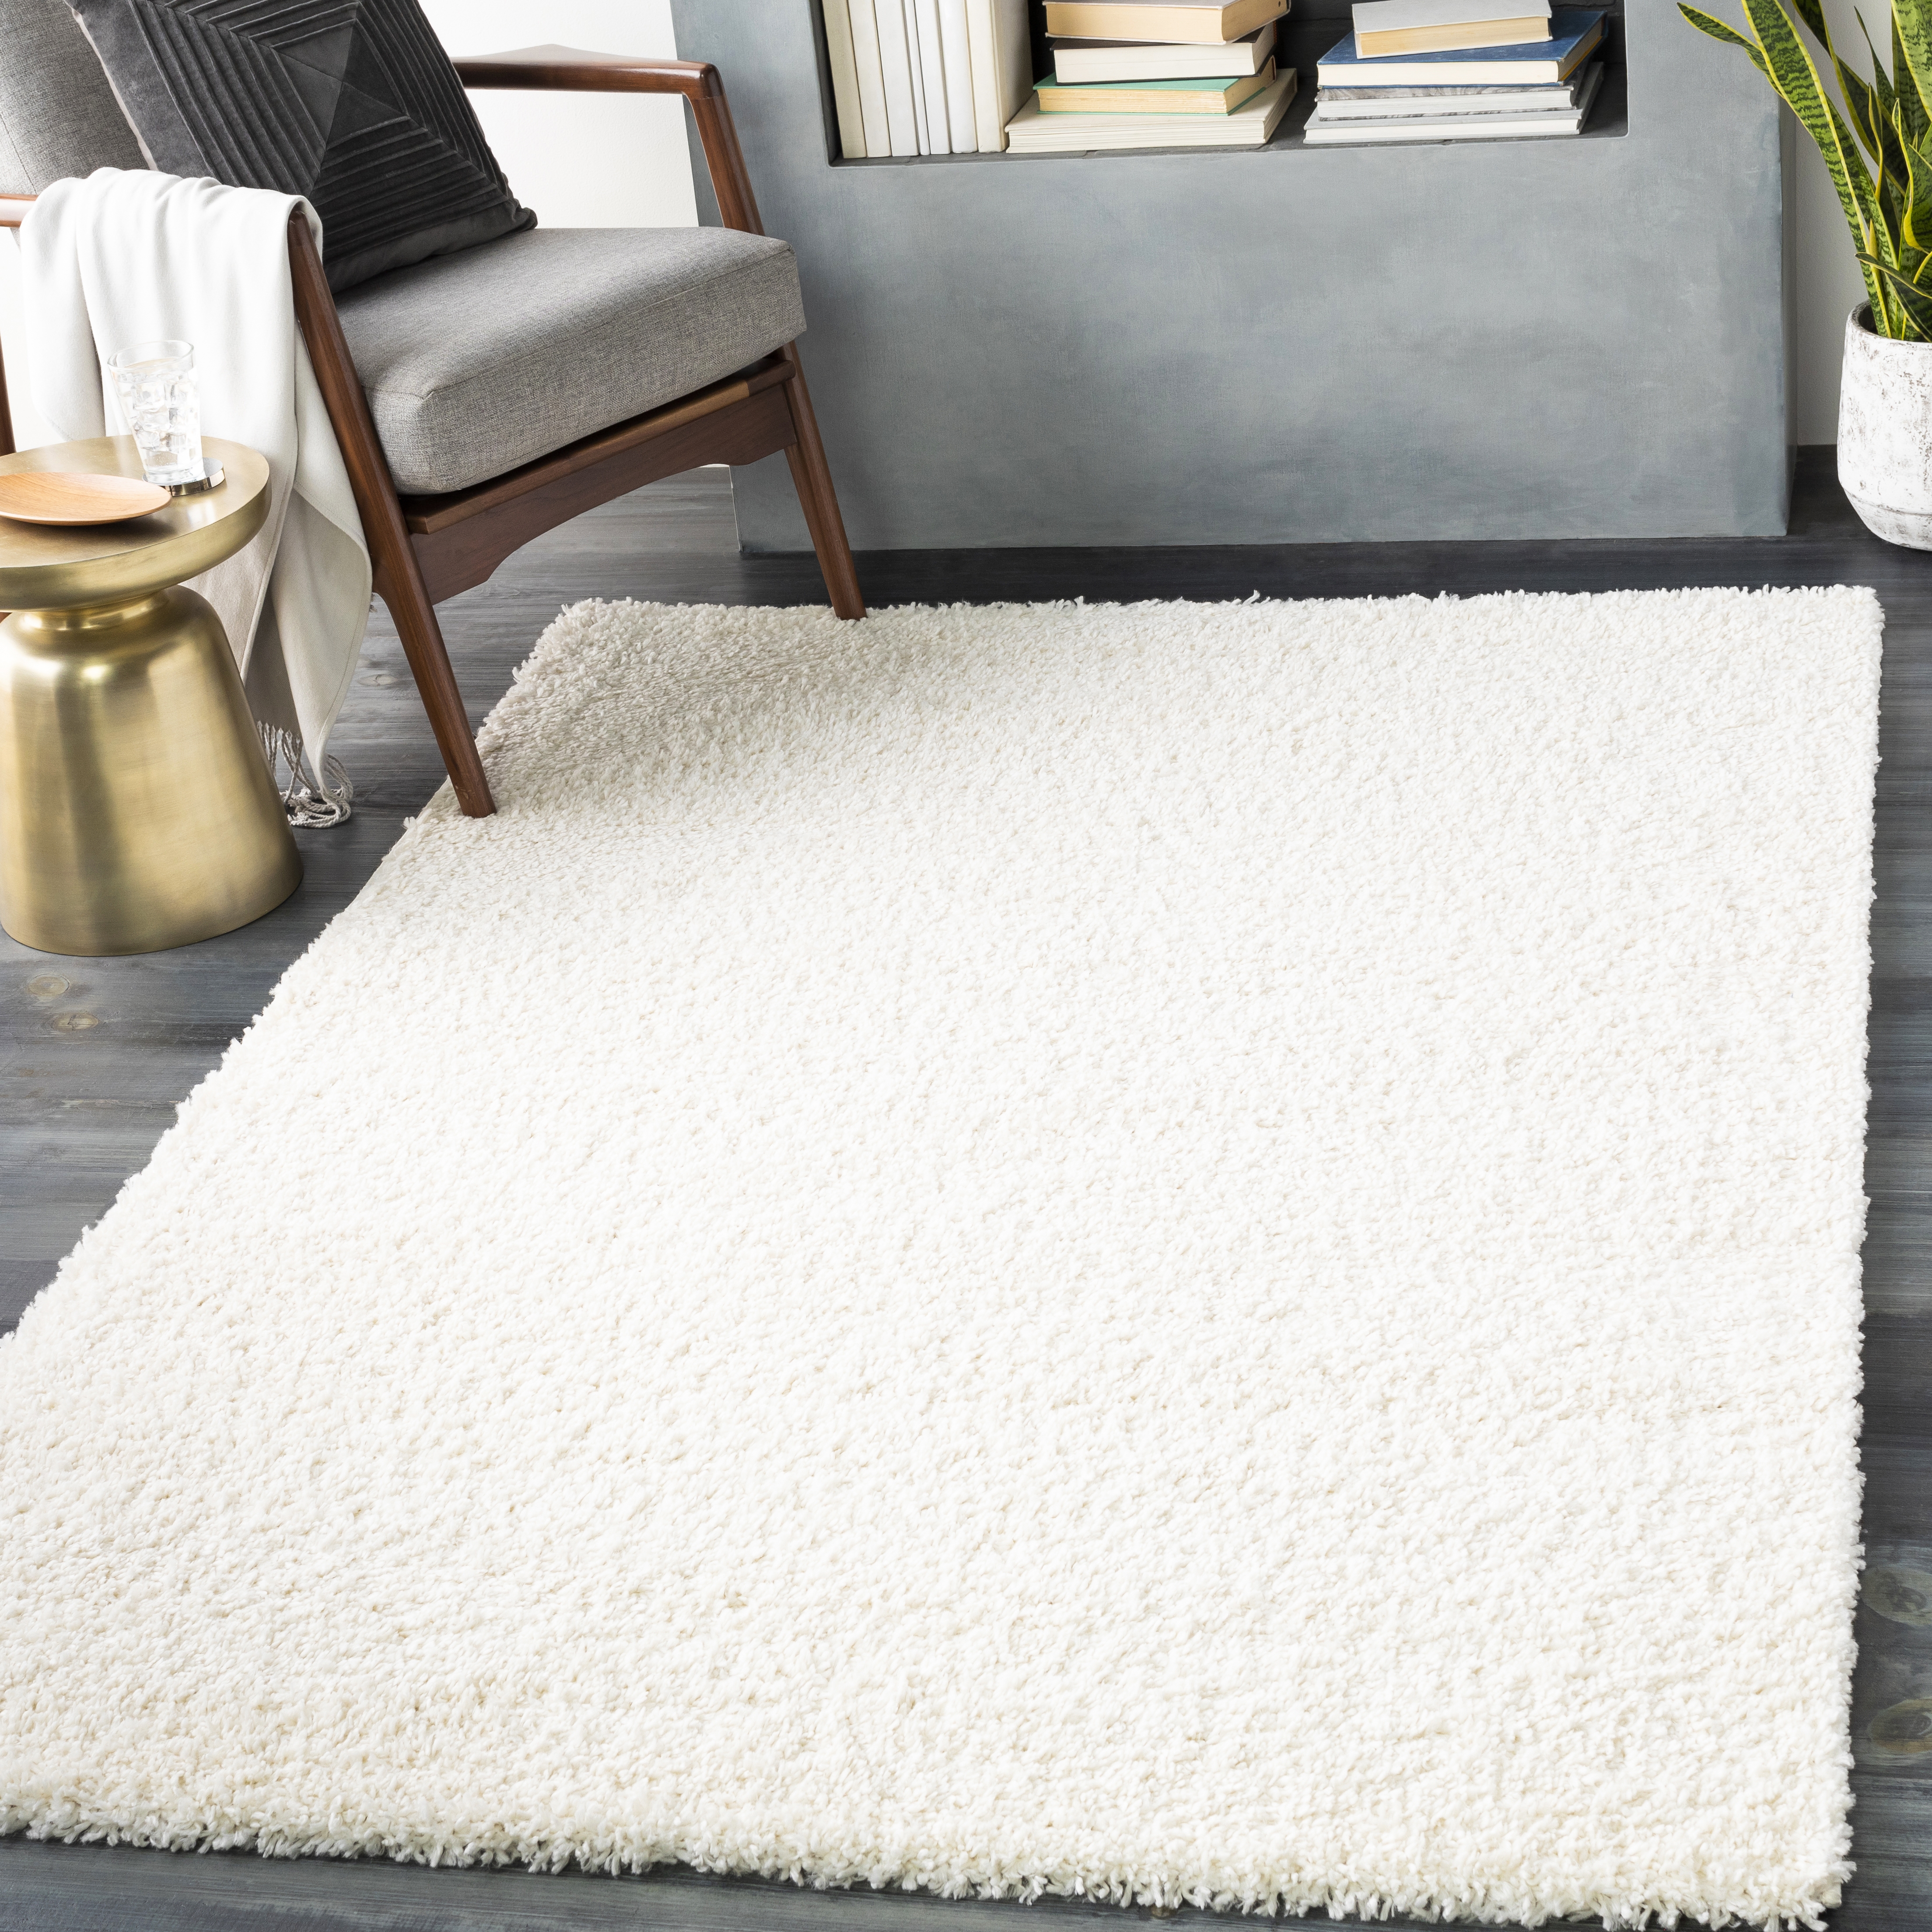 Deluxe Shag Rug, 8'10" x 12' - Image 1